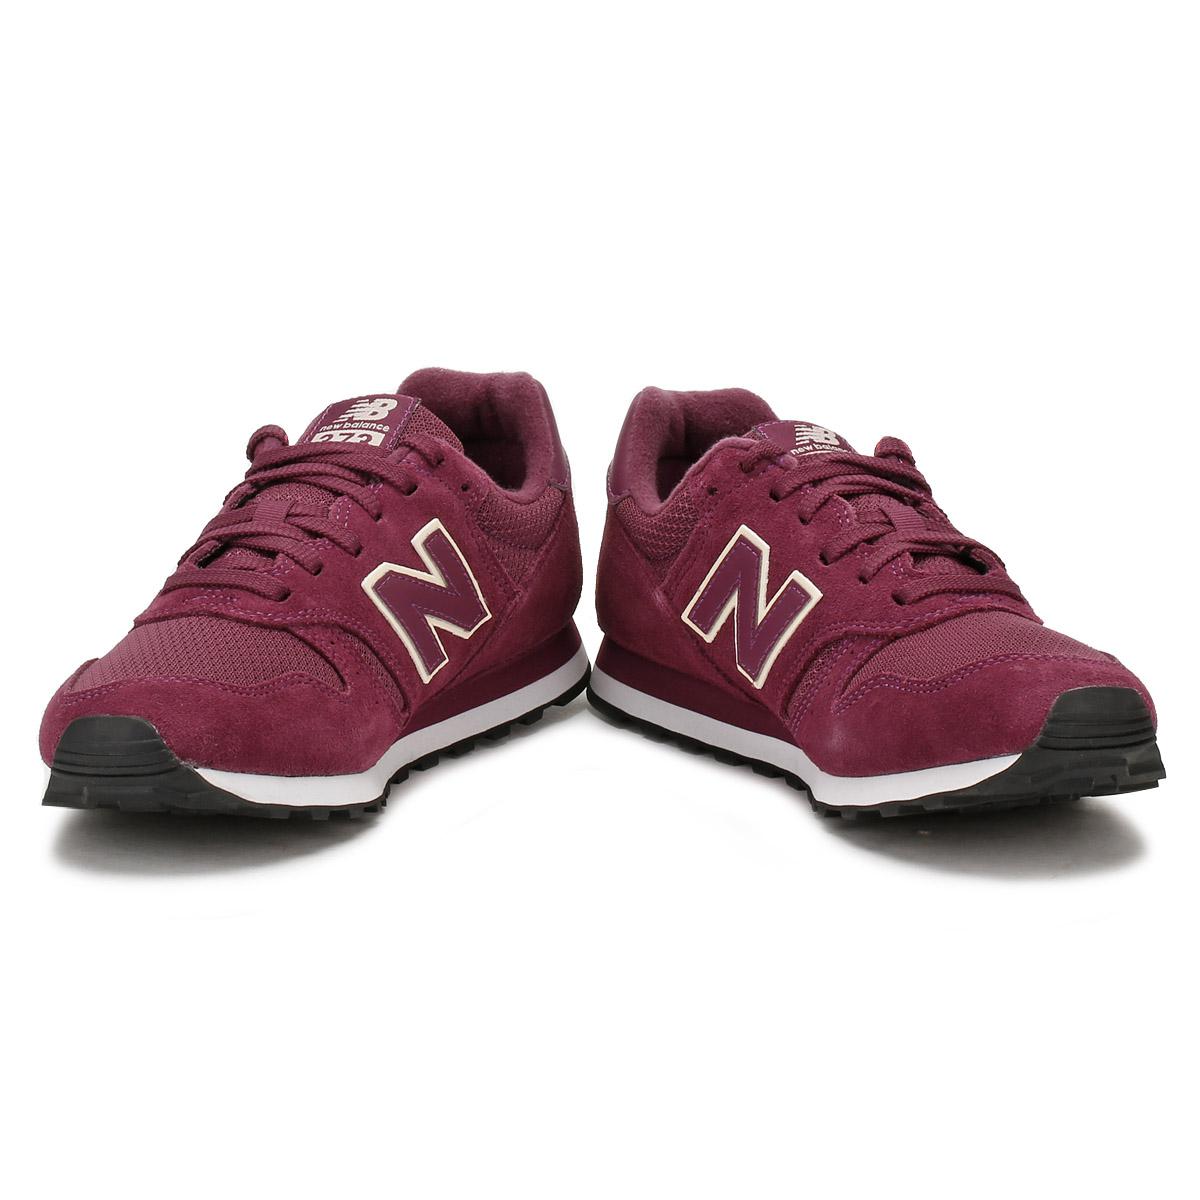 New Balance Womens Burgundy Suede 373 Trainers in Burgundy / Pink (Purple)  - Lyst